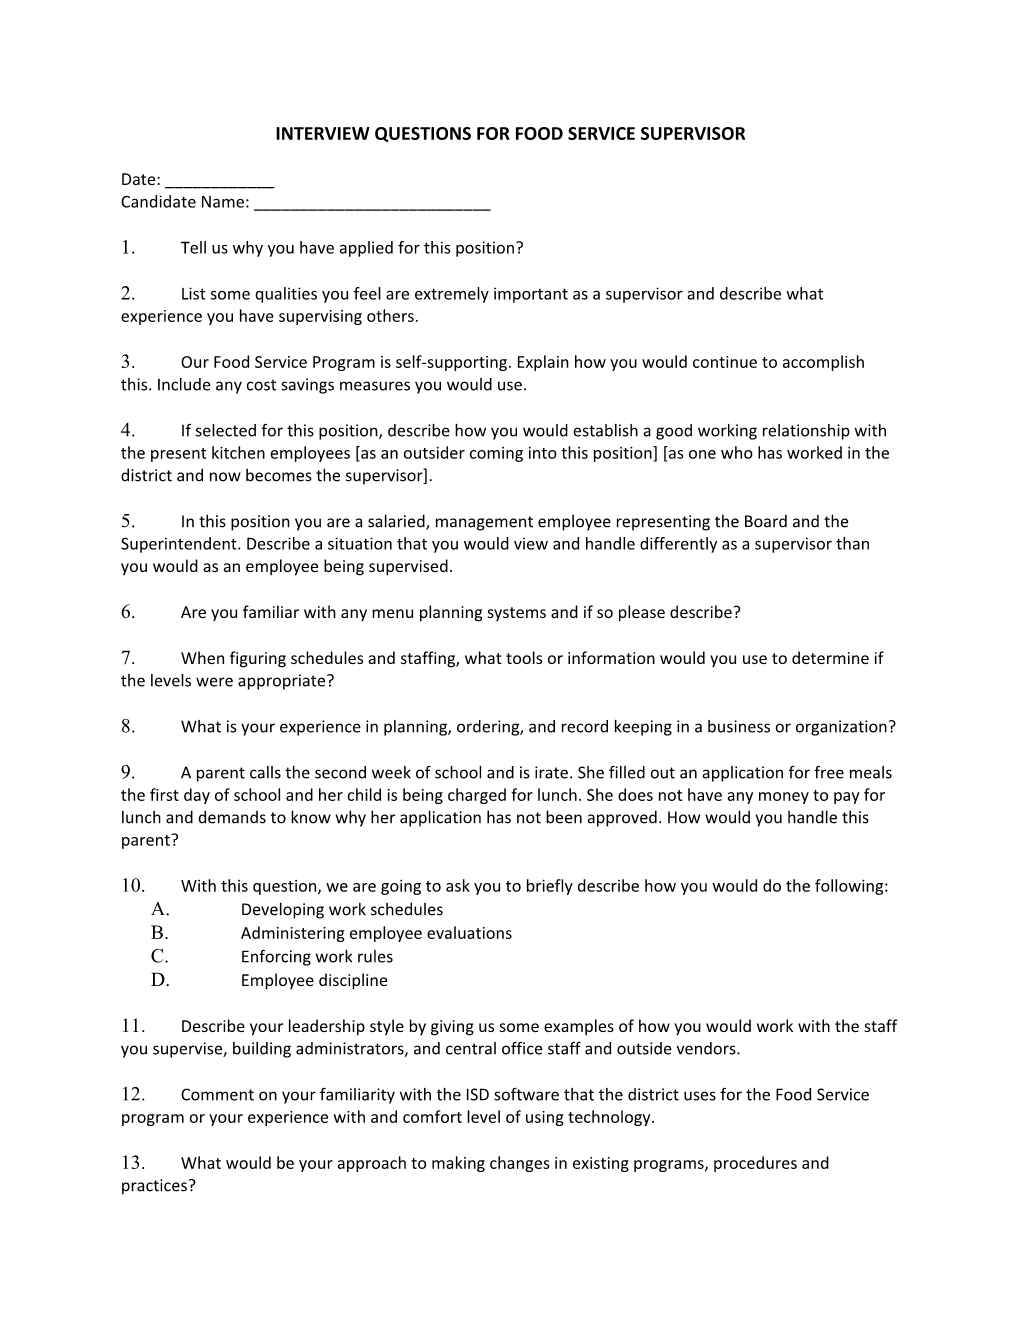 Interview Questions For Food Service Supervisor